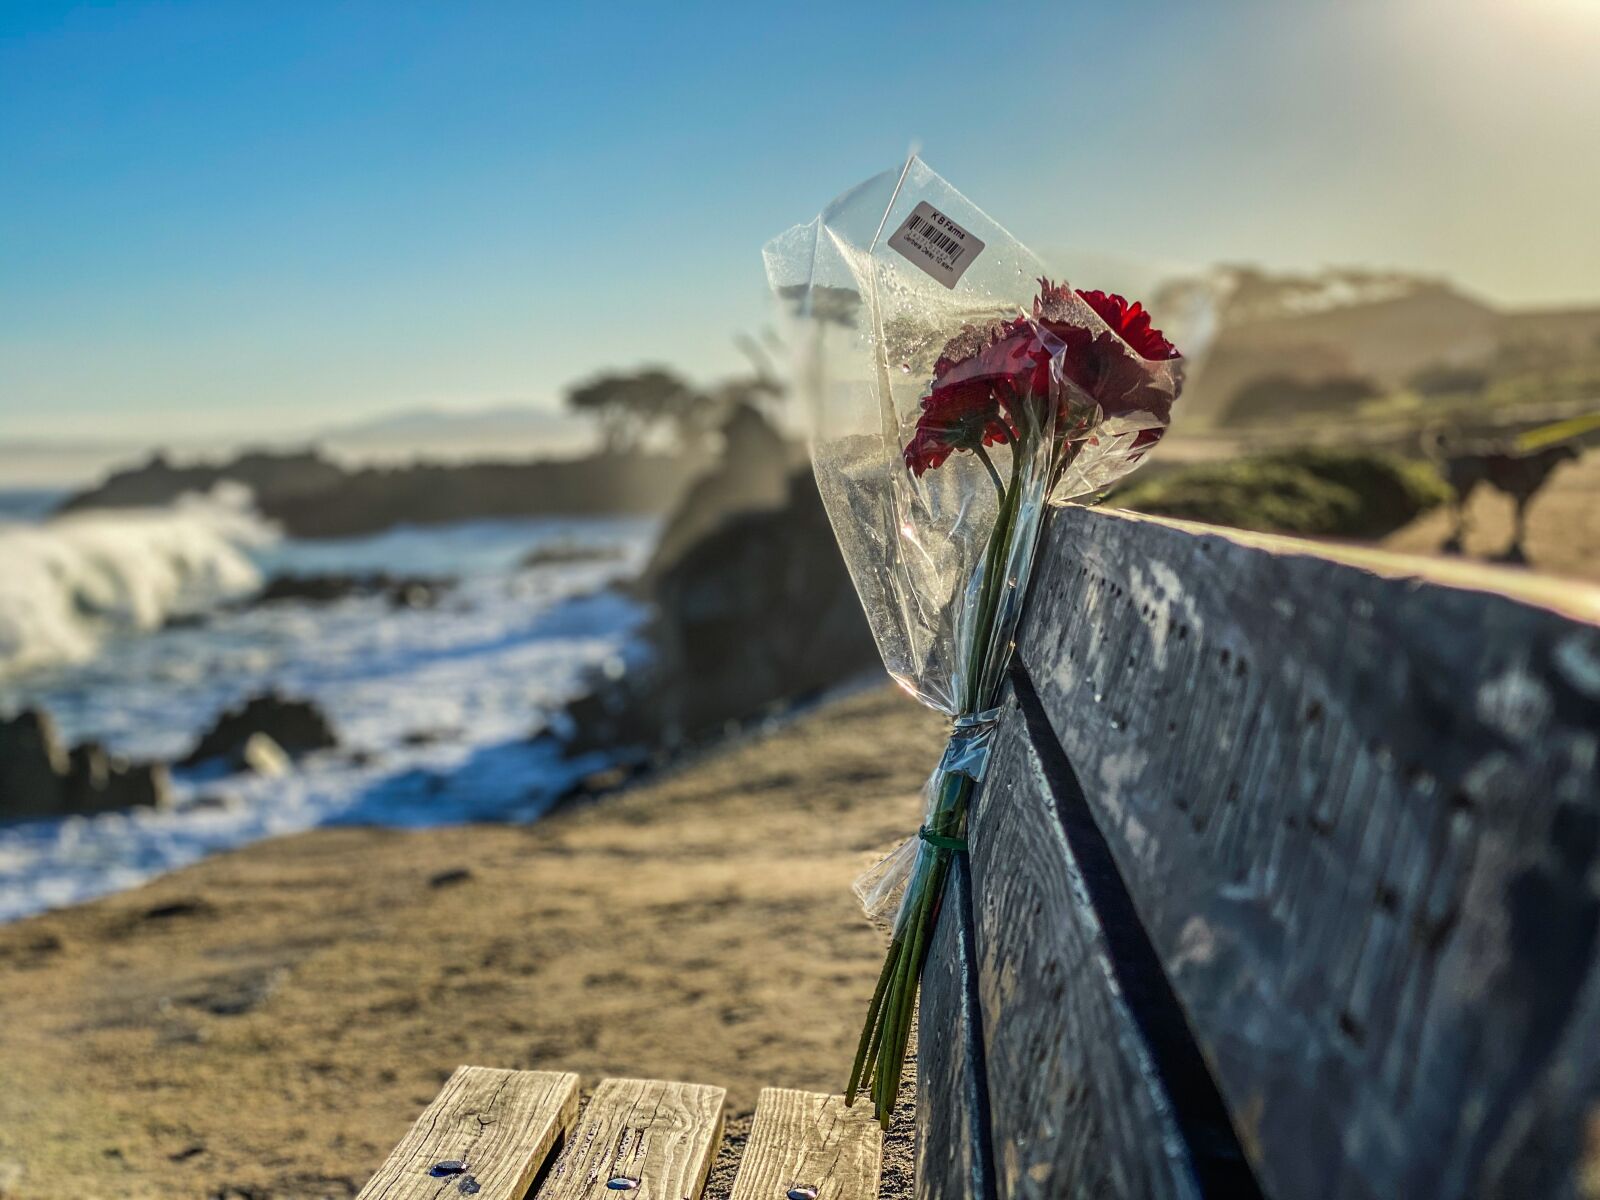 iPhone 11 Pro back dual camera 6mm f/2 sample photo. Flowers, ocean, bench photography